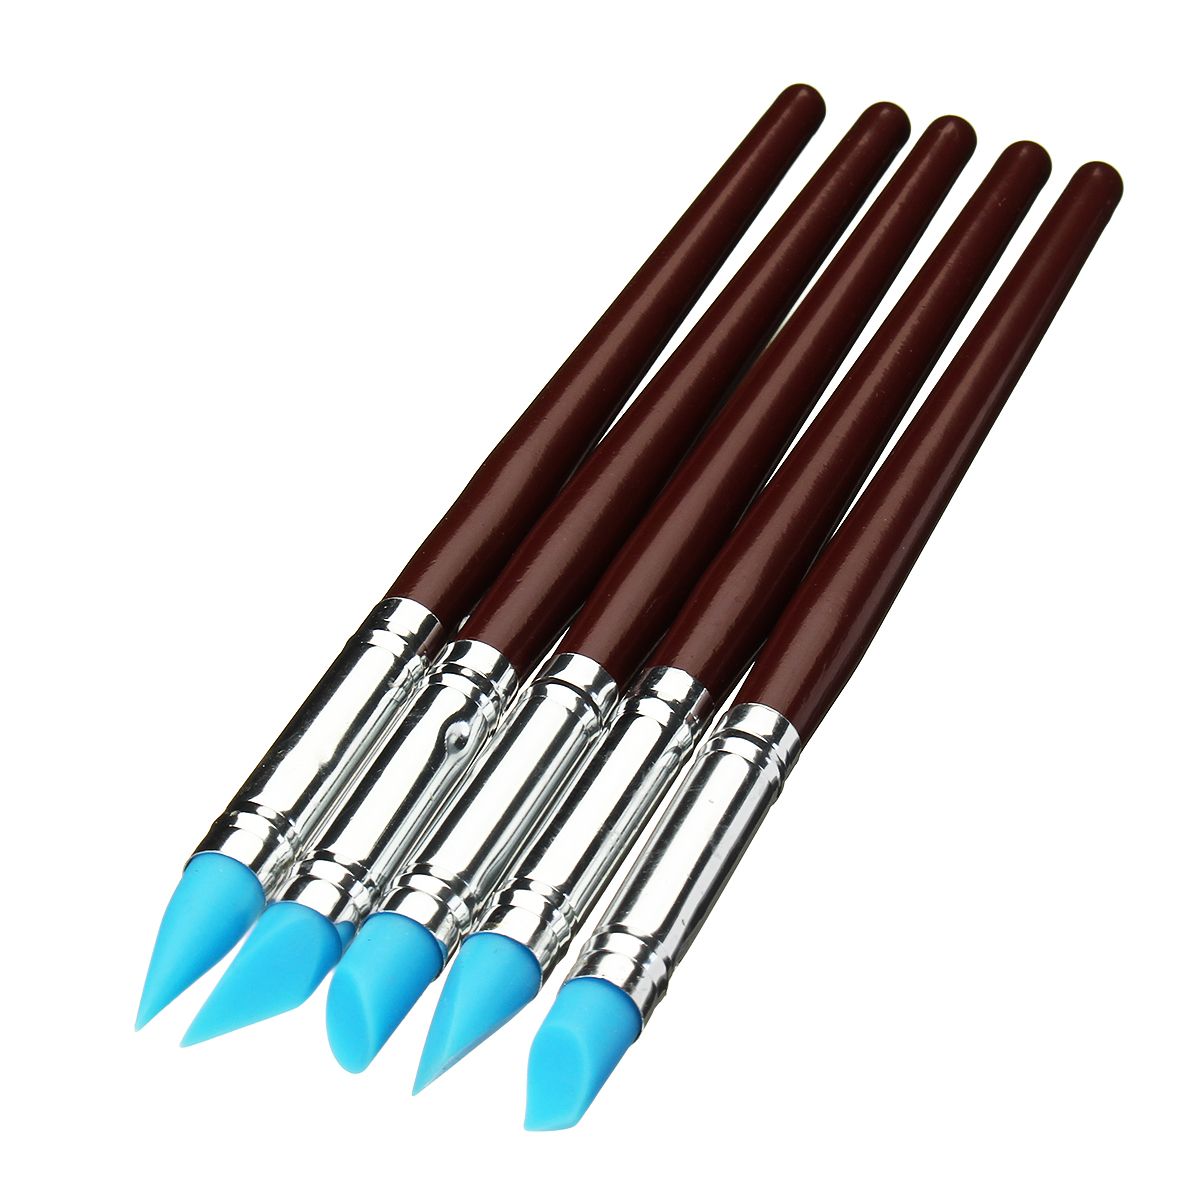 Ball-Stylus-Dotting-Tools-Clay-Pottery-Modeling-Carving-Rock-Ceramics-Painting-Kit-1448224